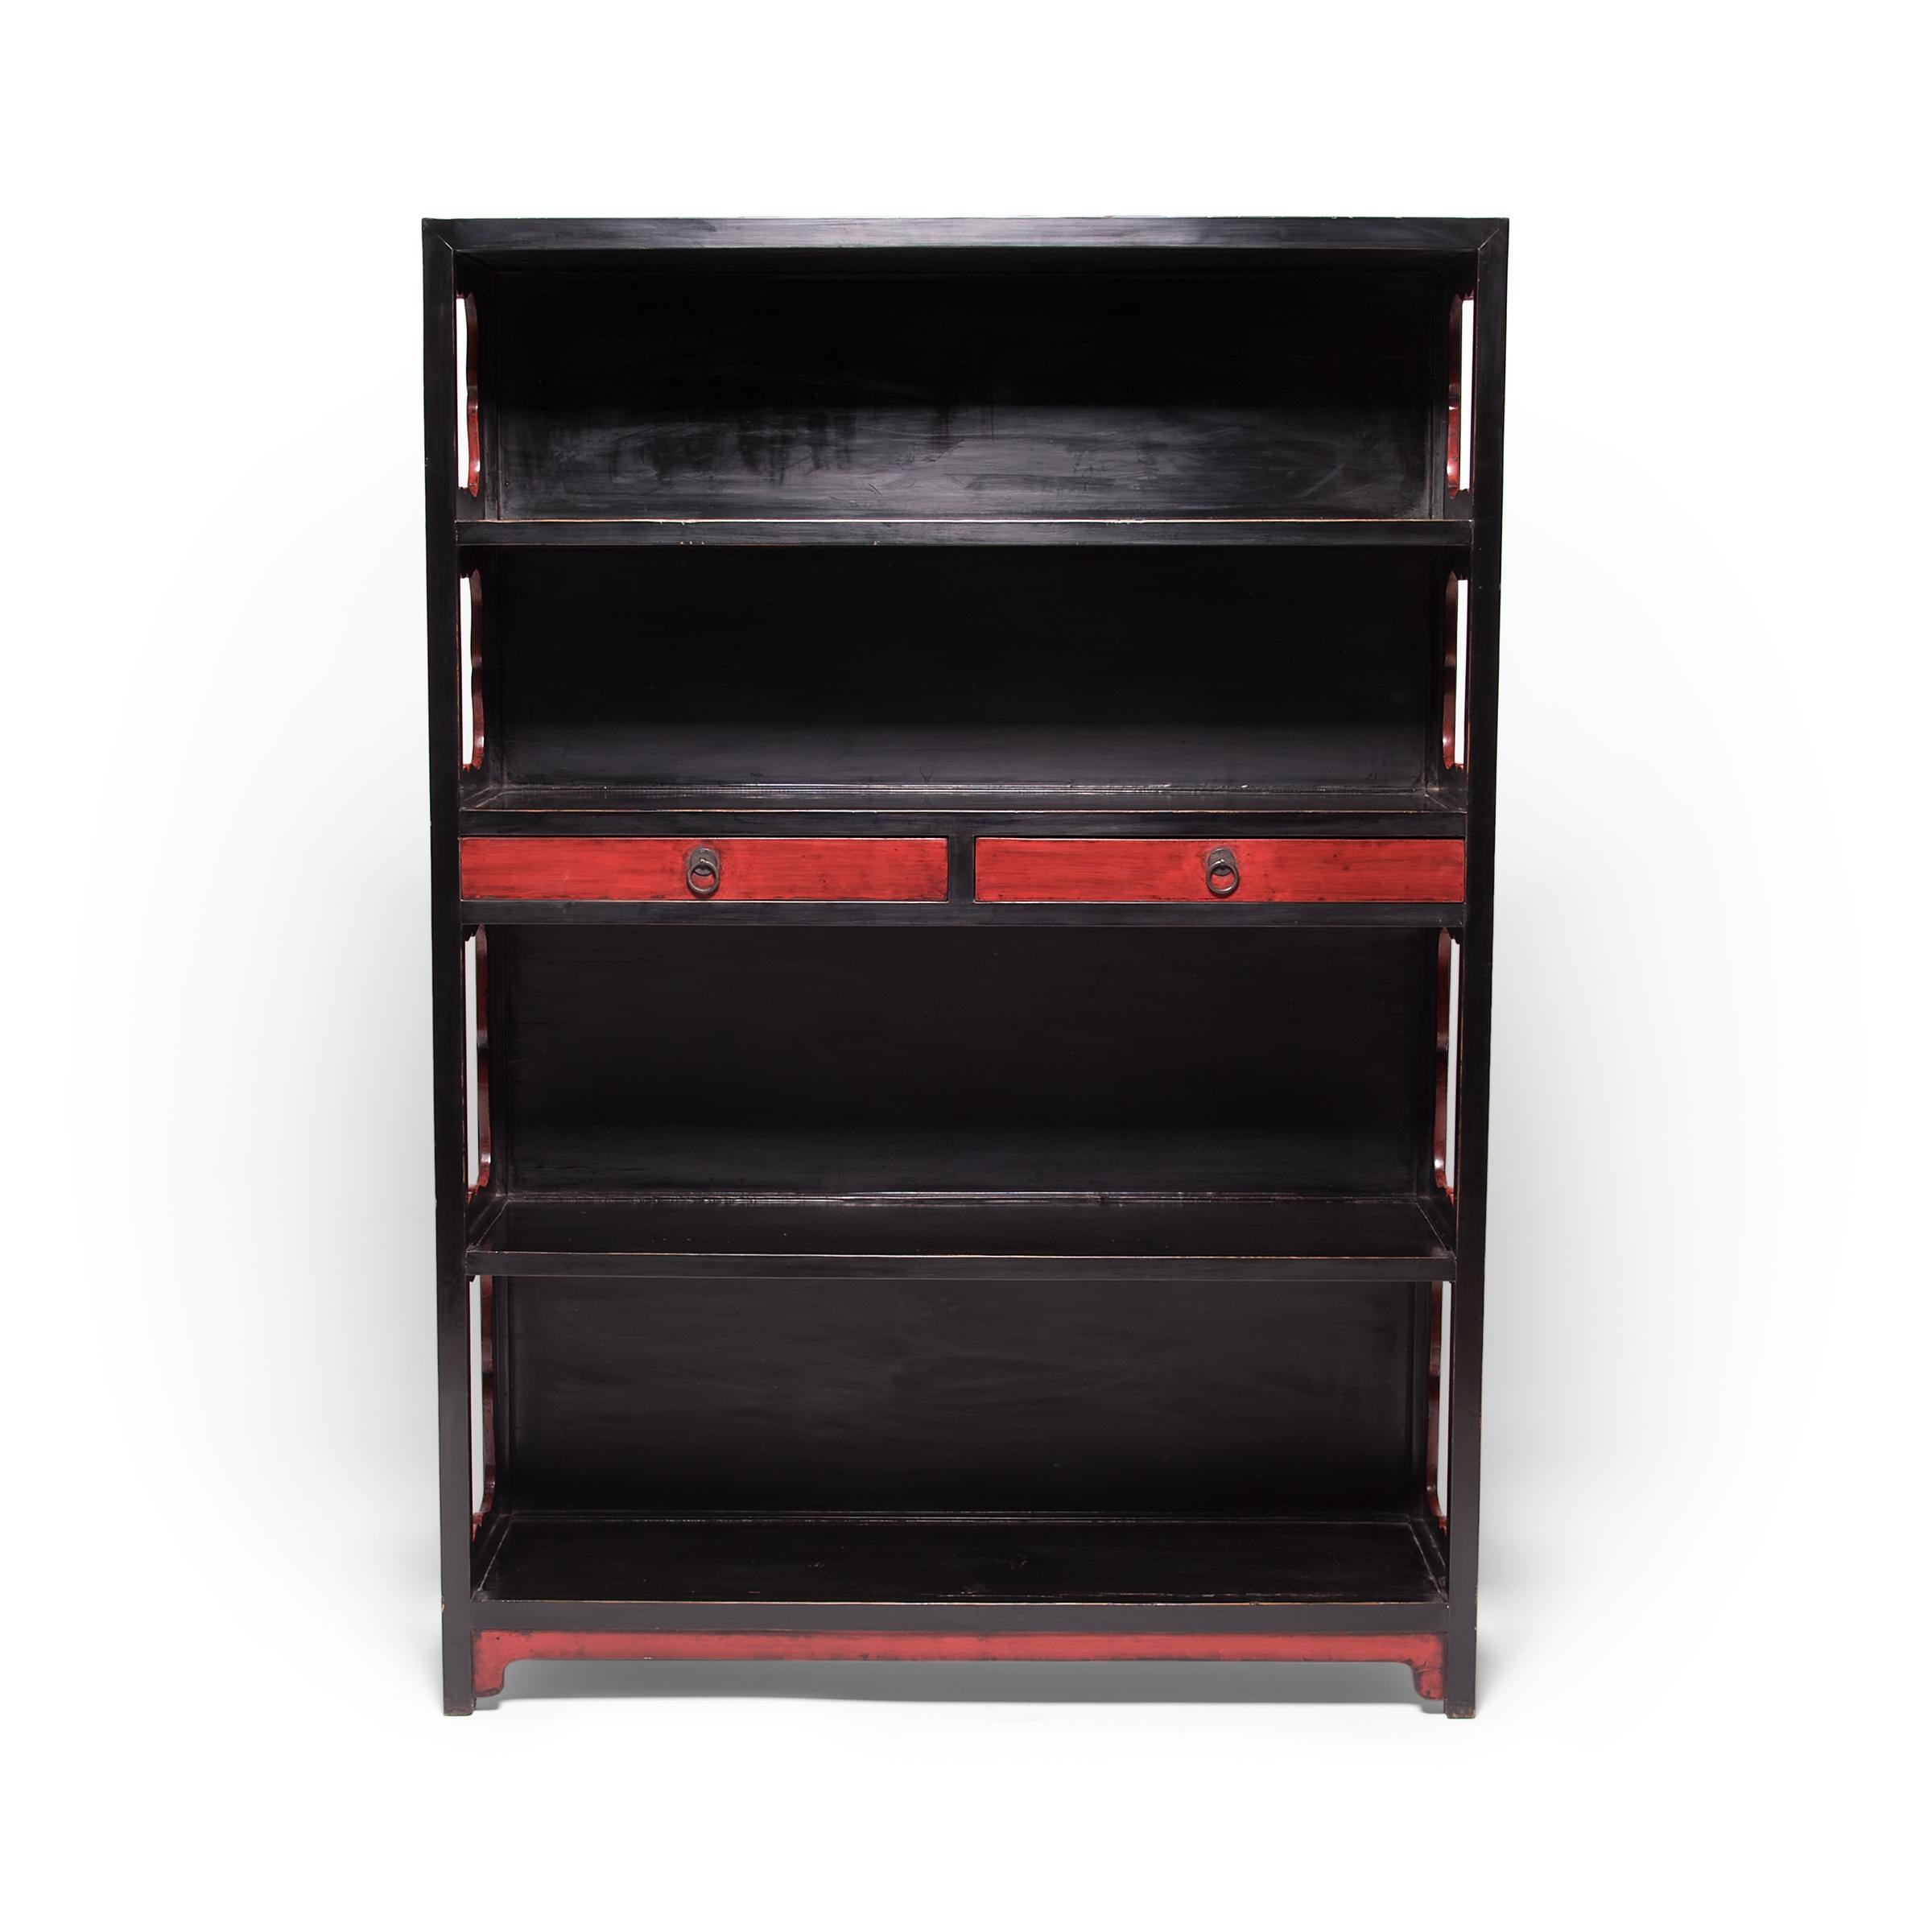 This striking red and black lacquer bookcase once stood in the center of a traditional Chinese scholars' studio, displaying a collection of books, scrolls, and treasured objects. The elegant case has two shallow drawers and four open shelves, each